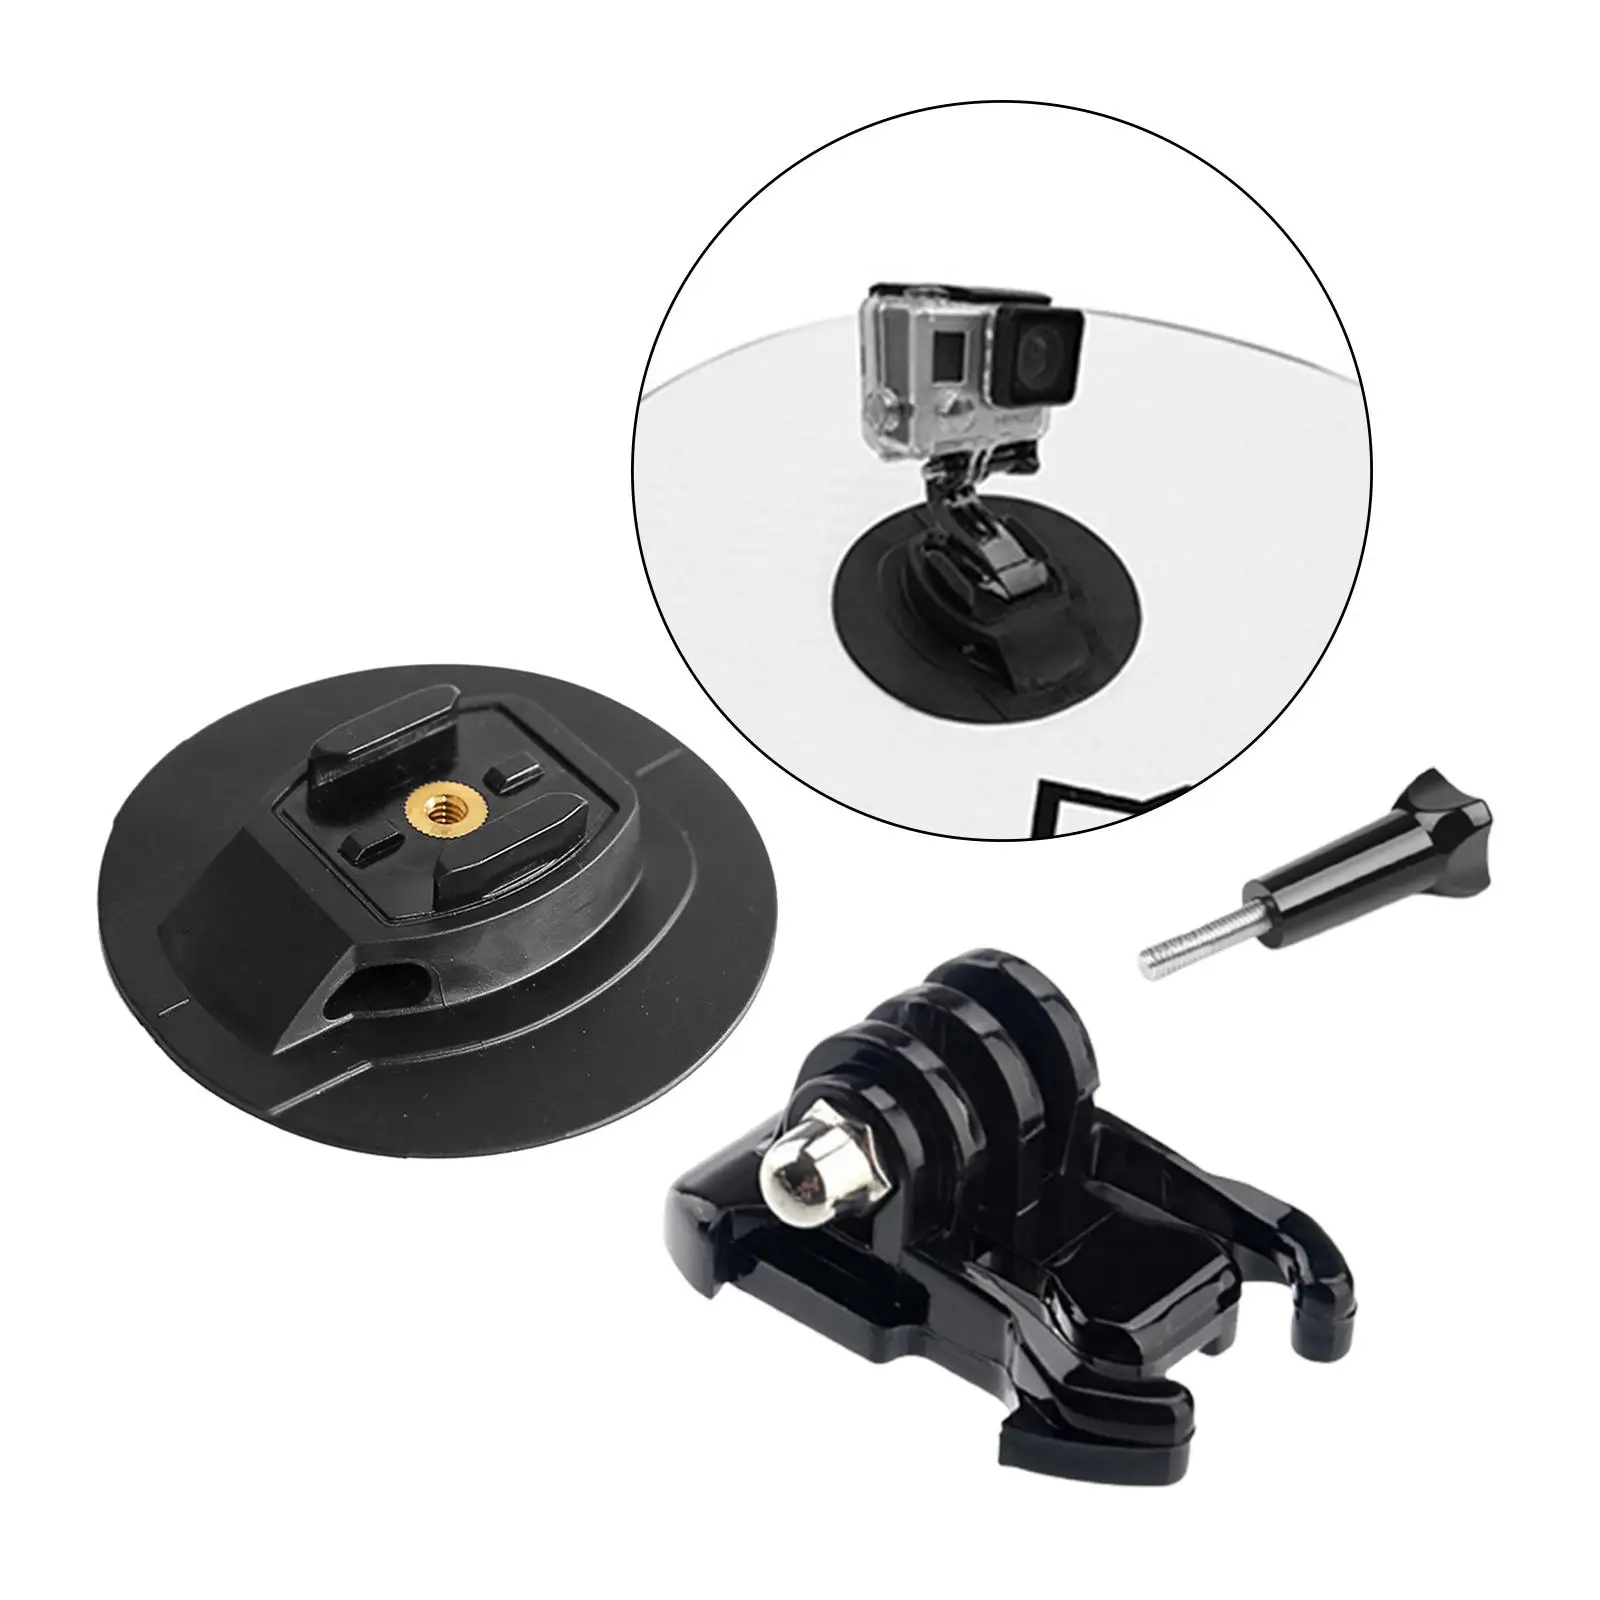 Surfboard Camera Base Practical with Quick Release Holder Fixed Support for